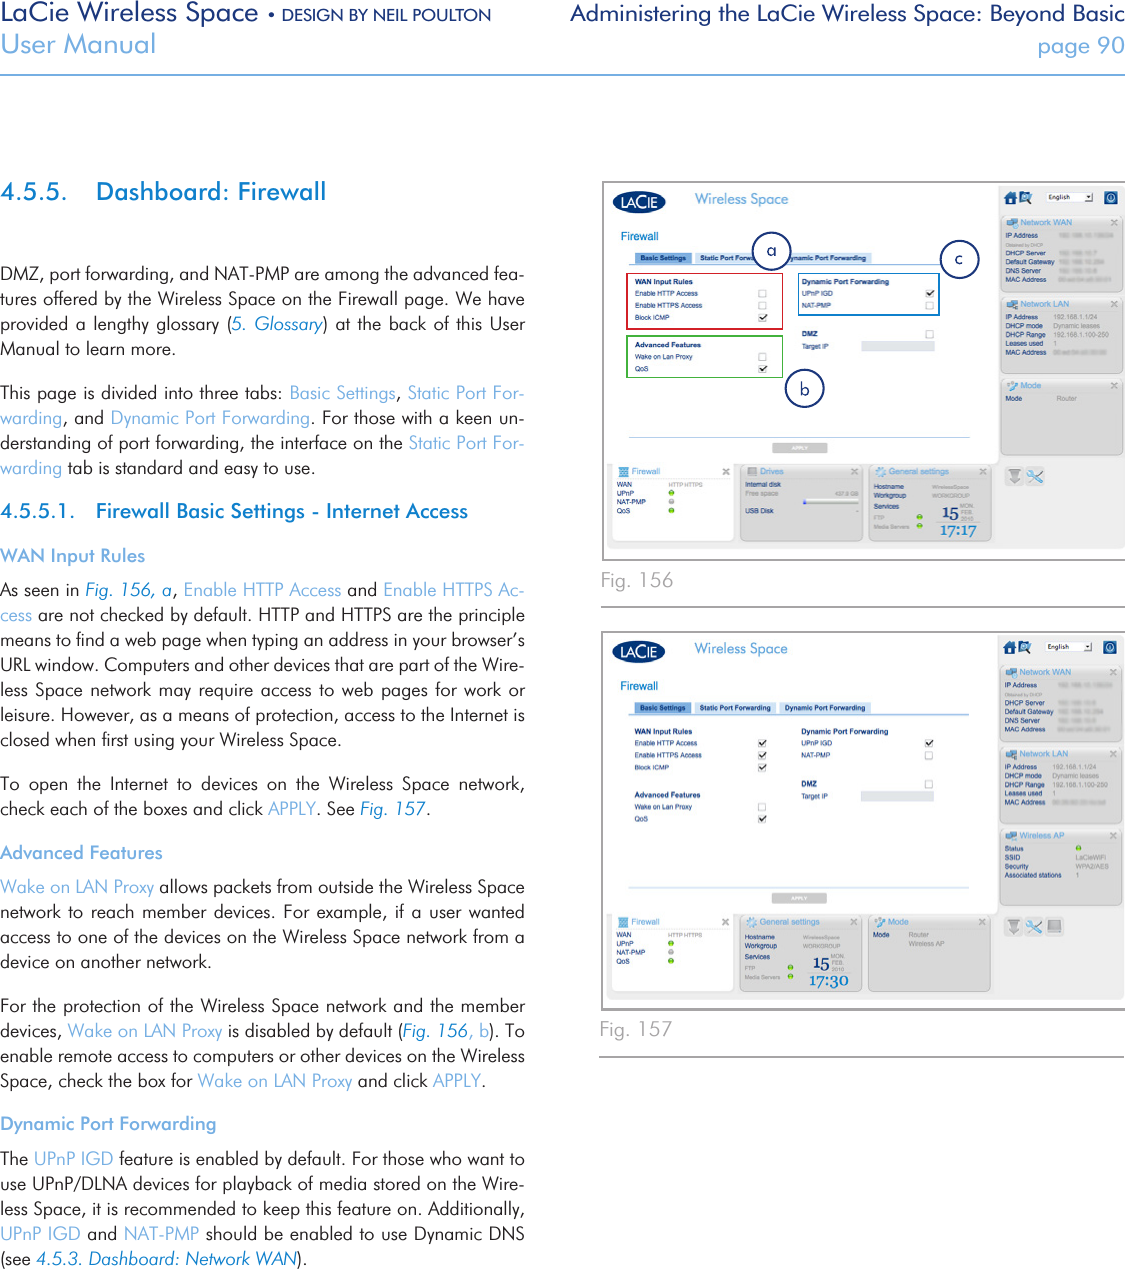 LaCie Wireless Space • DESIGN BY NEIL POULTON Administering the LaCie Wireless Space: Beyond BasicUser Manual  page 904.5.5.  Dashboard: FirewallDMZ, port forwarding, and NAT-PMP are among the advanced fea-tures offered by the Wireless Space on the Firewall page. We have provided a lengthy glossary  (5. Glossary) at the back of  this User Manual to learn more. This page is divided into three tabs: Basic Settings, Static Port For-warding, and Dynamic Port Forwarding. For those with a keen un-derstanding of port forwarding, the interface on the Static Port For-warding tab is standard and easy to use.4.5.5.1.  Firewall Basic Settings - Internet AccessWAN Input RulesAs seen in Fig. 156, a, Enable HTTP Access and Enable HTTPS Ac-cess are not checked by default. HTTP and HTTPS are the principle means to ﬁnd a web page when typing an address in your browser’s URL window. Computers and other devices that are part of the Wire-less Space network may require access to web pages  for  work  or leisure. However, as a means of protection, access to the Internet is closed when ﬁrst using your Wireless Space.To  open  the  Internet  to  devices  on  the  Wireless  Space  network, check each of the boxes and click APPLY. See Fig. 157.Advanced FeaturesWake on LAN Proxy allows packets from outside the Wireless Space network to reach member devices. For  example,  if  a  user wanted access to one of the devices on the Wireless Space network from a device on another network.For the protection of the Wireless Space network and the member devices, Wake on LAN Proxy is disabled by default (Fig. 156, b). To enable remote access to computers or other devices on the Wireless Space, check the box for Wake on LAN Proxy and click APPLY.Dynamic Port ForwardingThe UPnP IGD feature is enabled by default. For those who want to use UPnP/DLNA devices for playback of media stored on the Wire-less Space, it is recommended to keep this feature on. Additionally, UPnP IGD and NAT-PMP should be enabled to use Dynamic DNS (see 4.5.3. Dashboard: Network WAN). Fig. 156Fig. 157